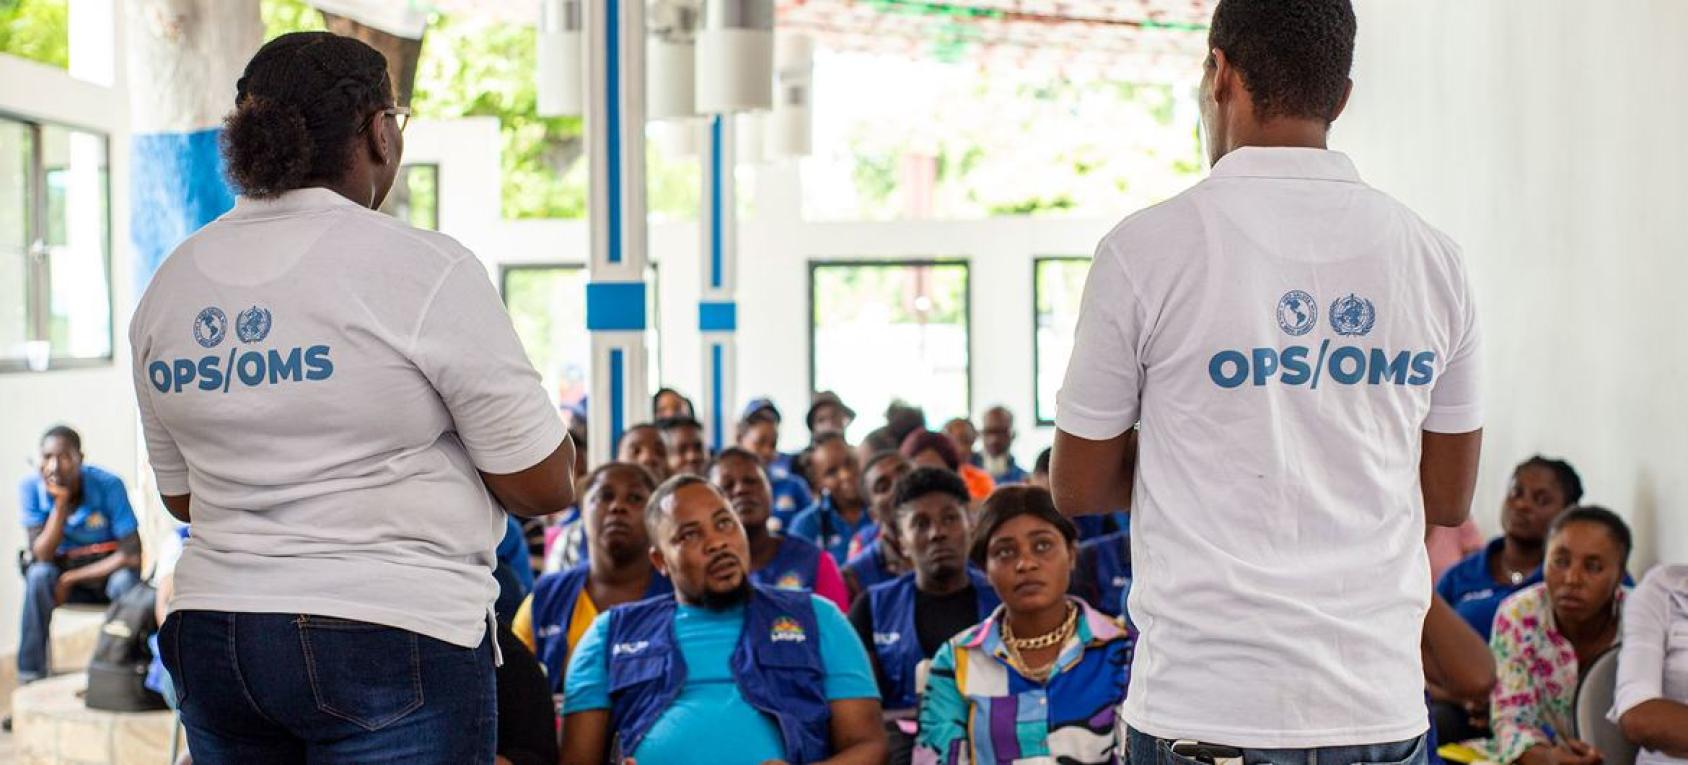 In Haiti, a man and a woman wearing a white T-shirt with "PAHO/WHO" written on it provide cholera revention training to health care workers sitting in a room. 